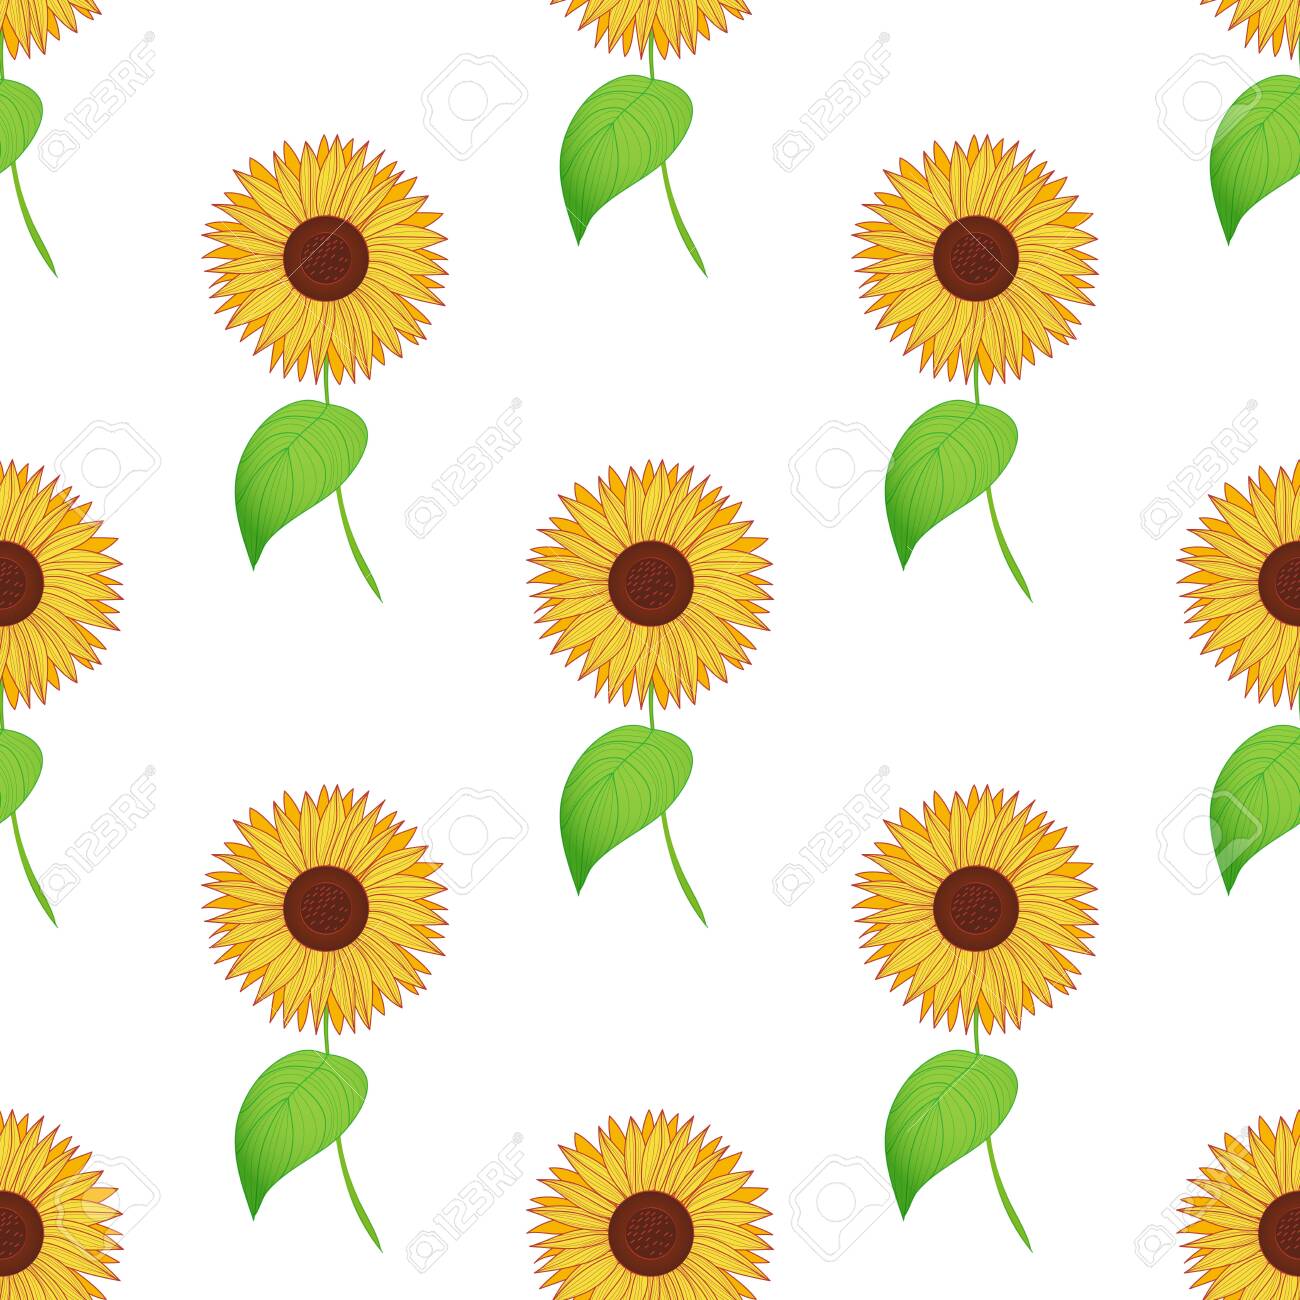 Seamless Autumn Pattern Of Sunflowers Background For Your Design